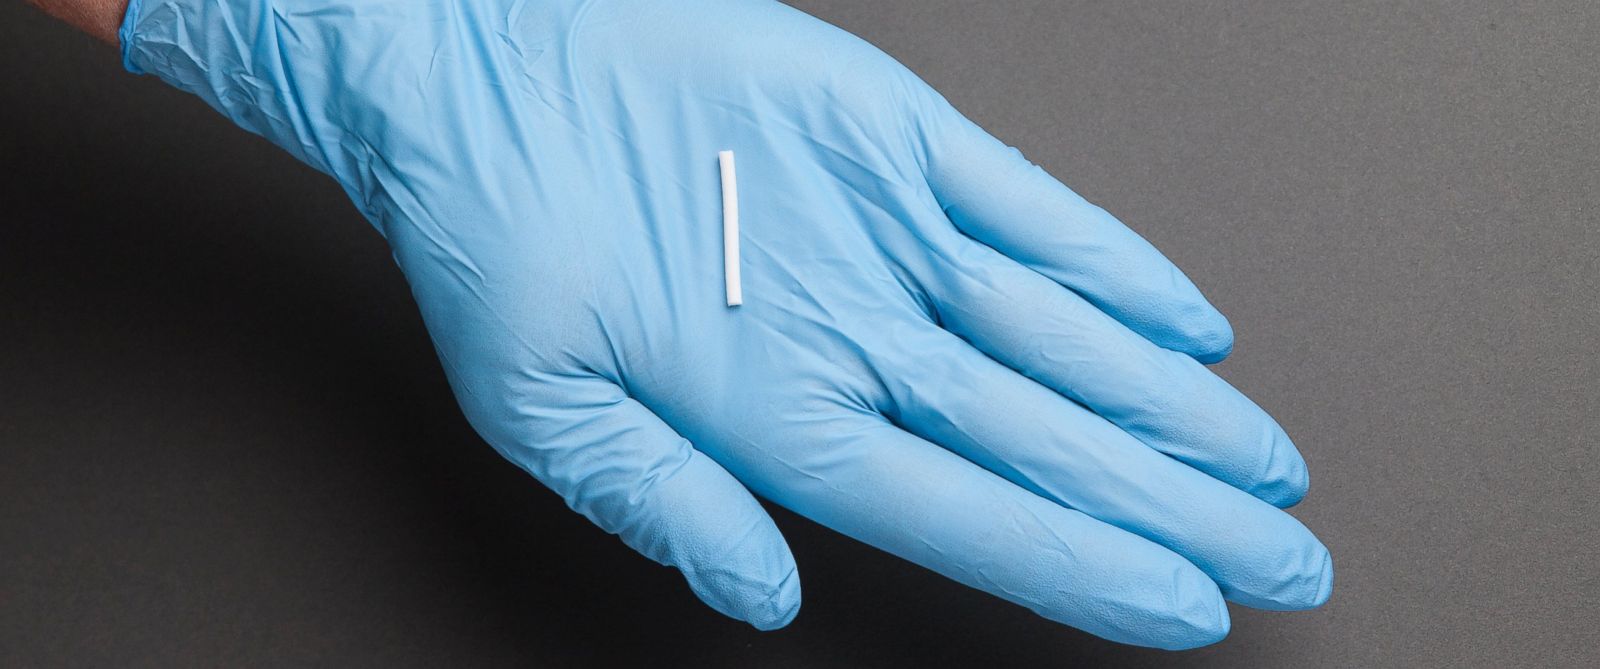 PHOTO: A newly FDA-approved implant, Probuphine, releases a low dose of medication to treat opioid addiction.